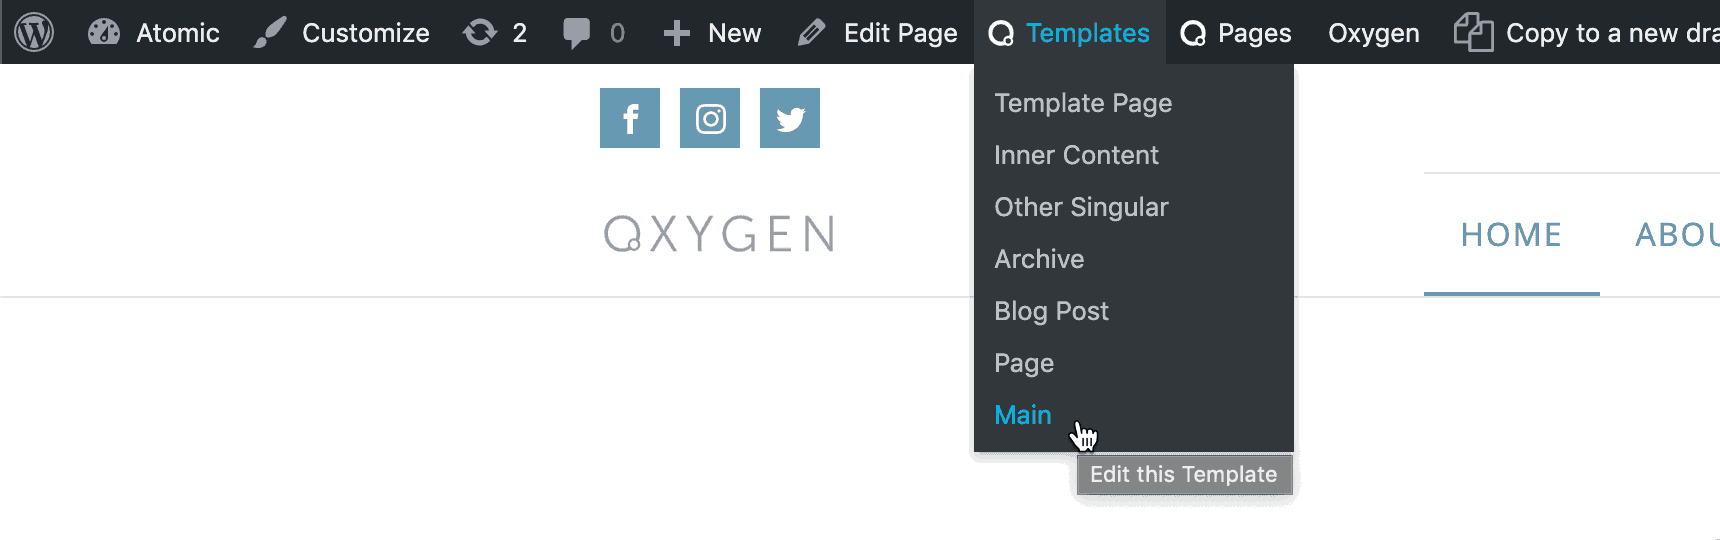 Templates and Pages Quick Edit Toolbar Menus in Oxygen